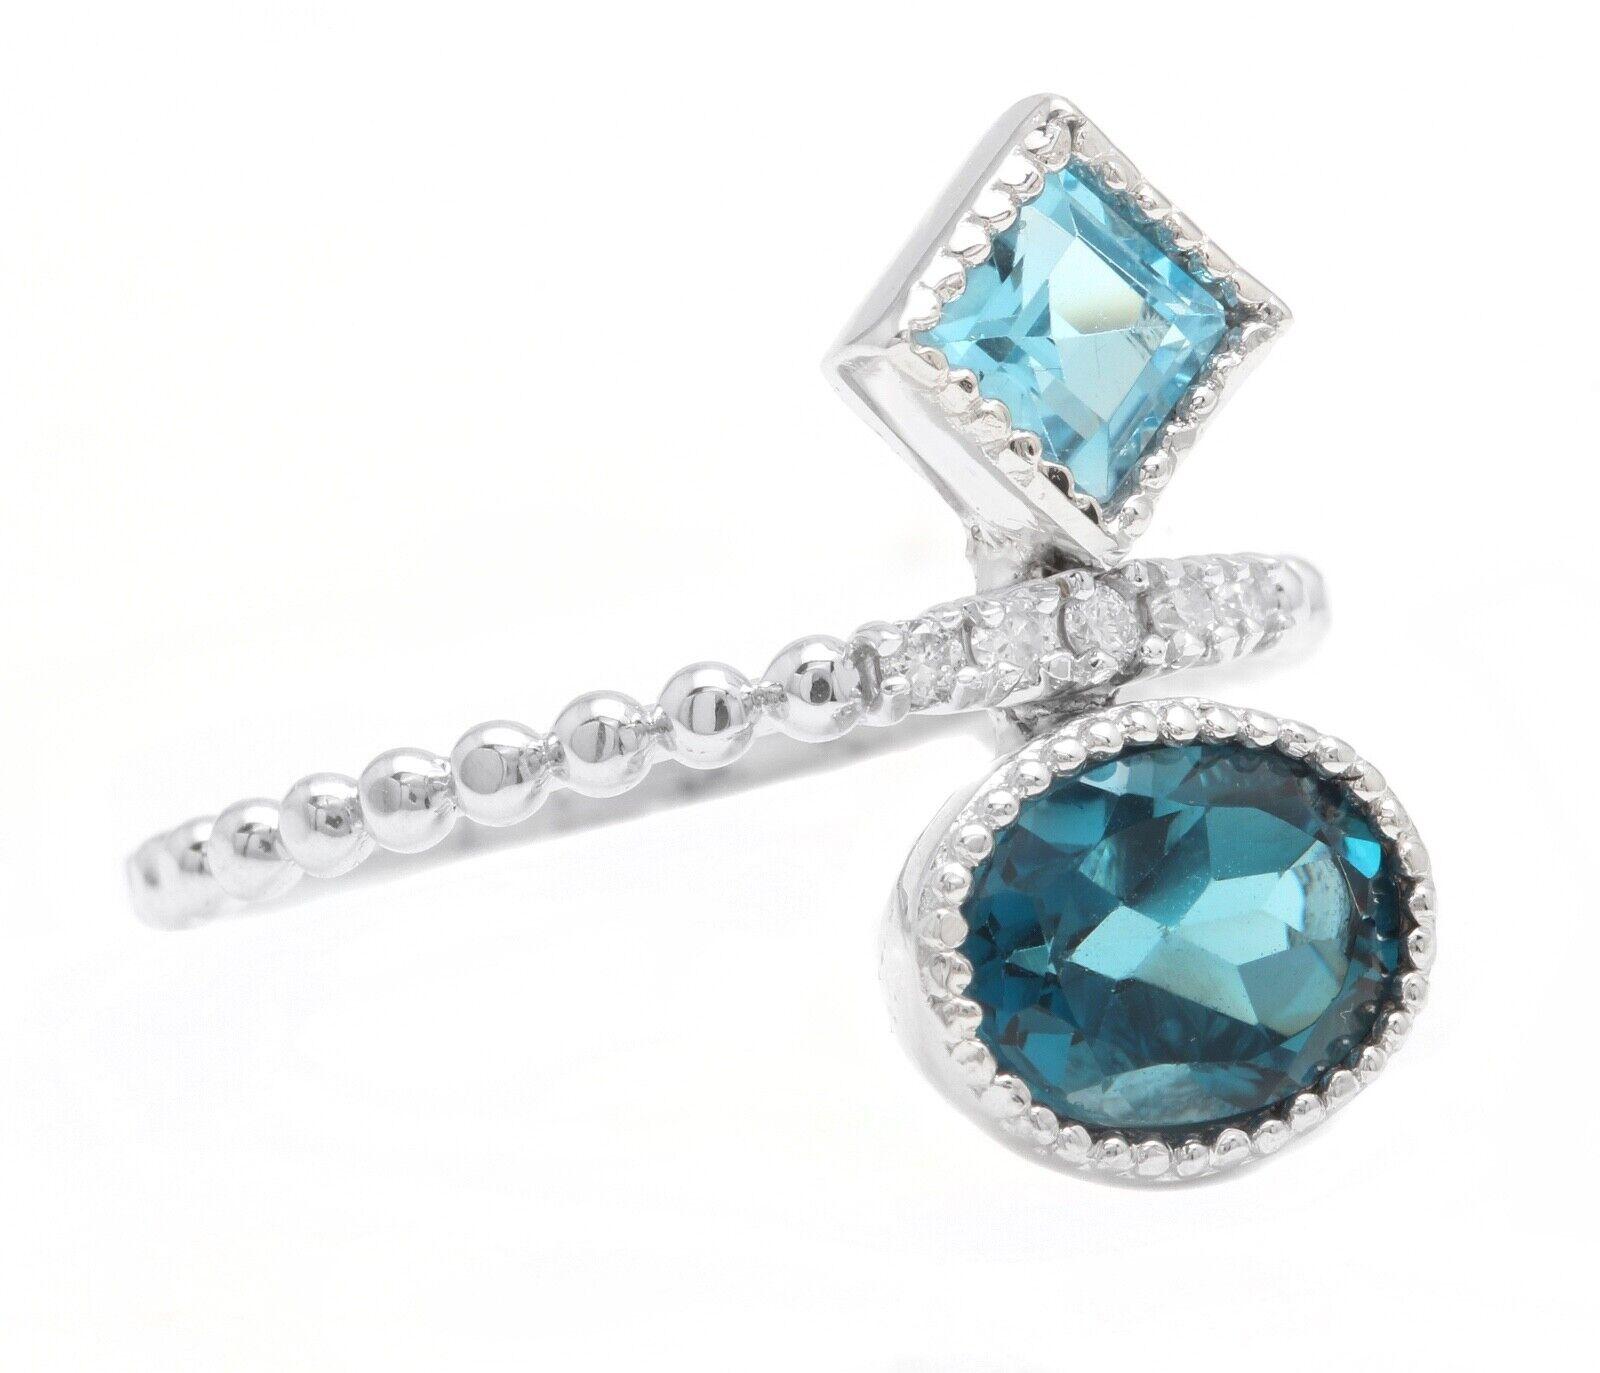 2.20 Carat Natural London & Swiss Blue Topaz and Diamond 14K Solid White Gold Ring

Total London & Swiss Blue Topaz Weight is: Approx. 2.10 Carats 
                                                                                                     